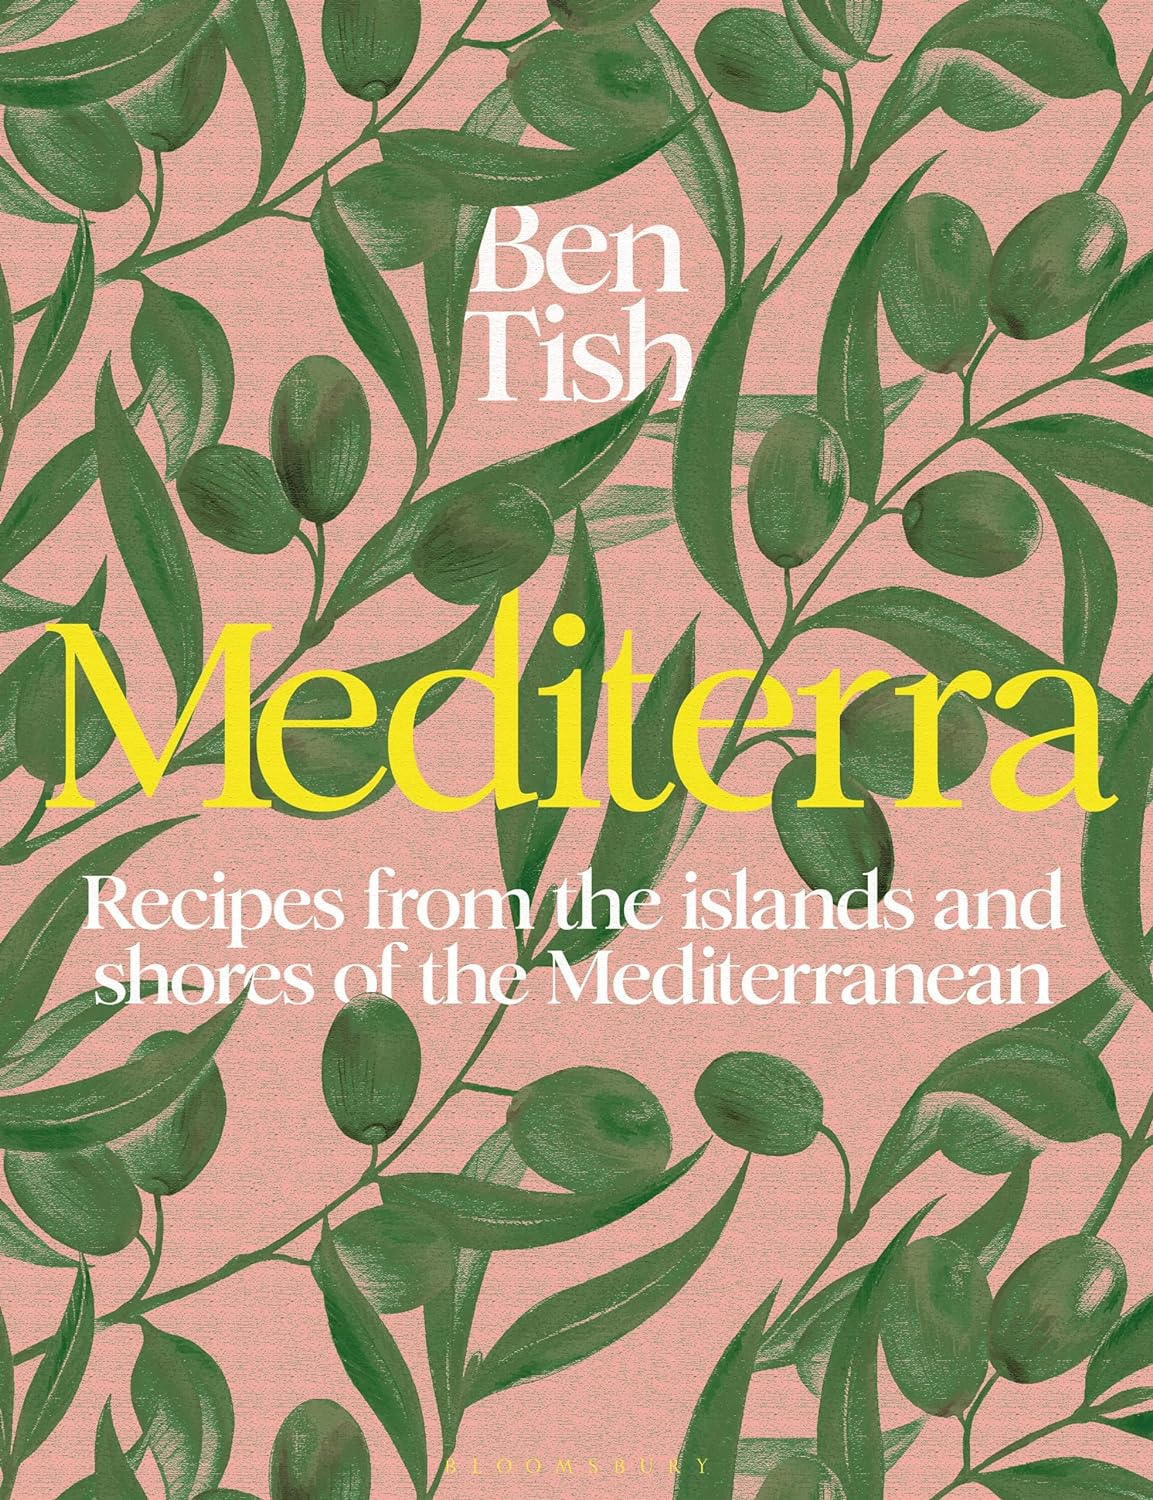 *Pre-order* Mediterra: Recipes from the Islands and Shores of the Mediterranean (Ben Tish)